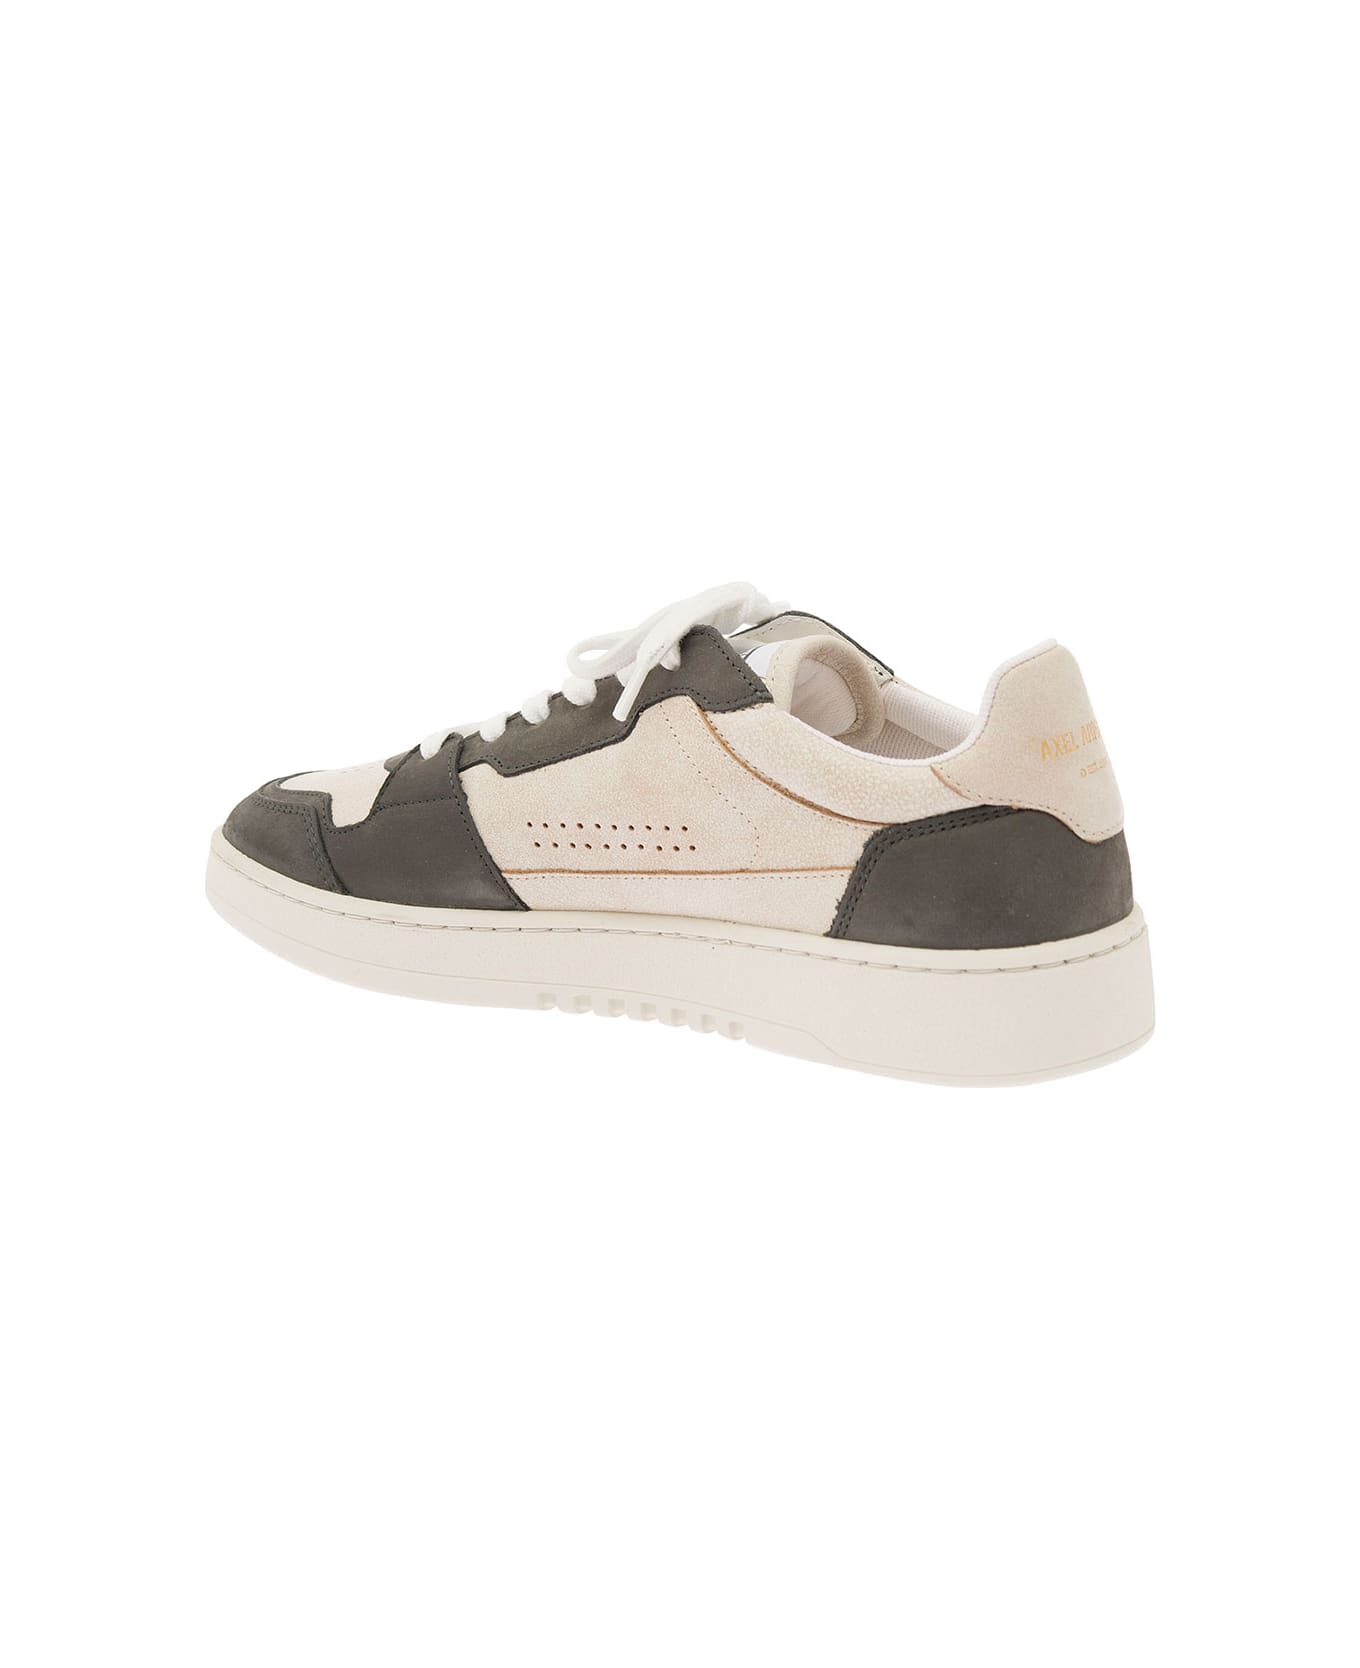 Axel Arigato 'dice Lo' Green And White Two-tone Sneakers In Calf Leather Man - Beige